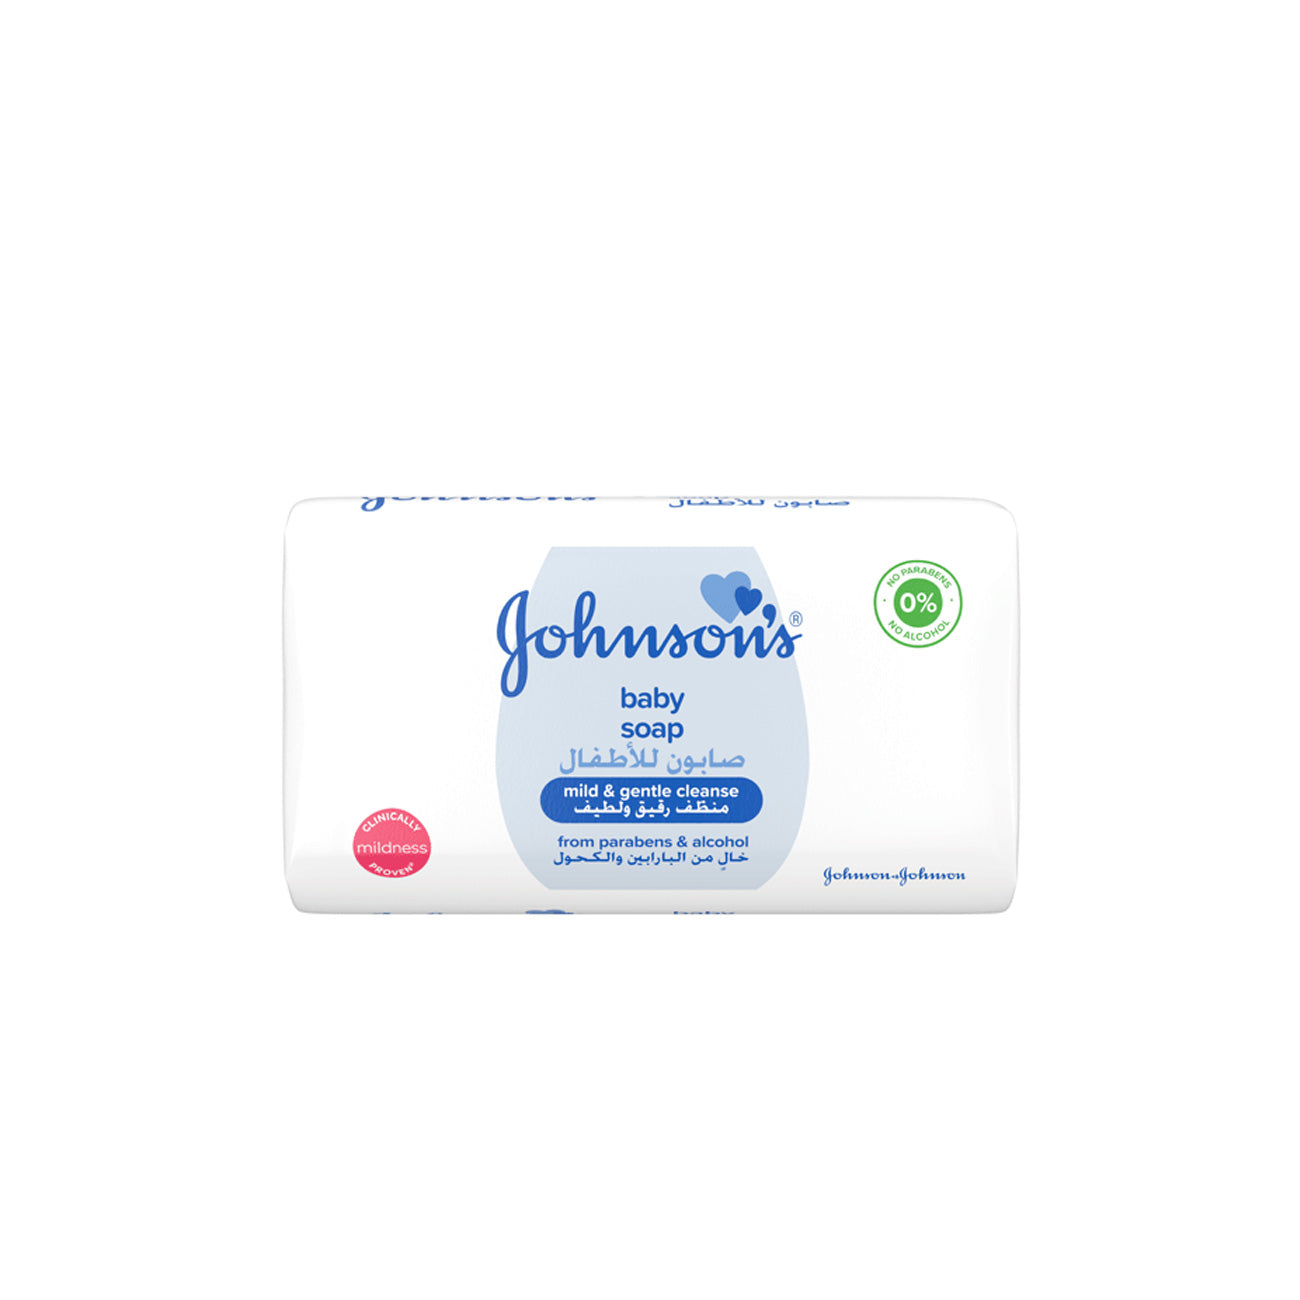 Johnson's Baby Soap, Mild And Gentle Cleanse Free From Parabens And Alcohol Keeps Skin Healthy - 125g